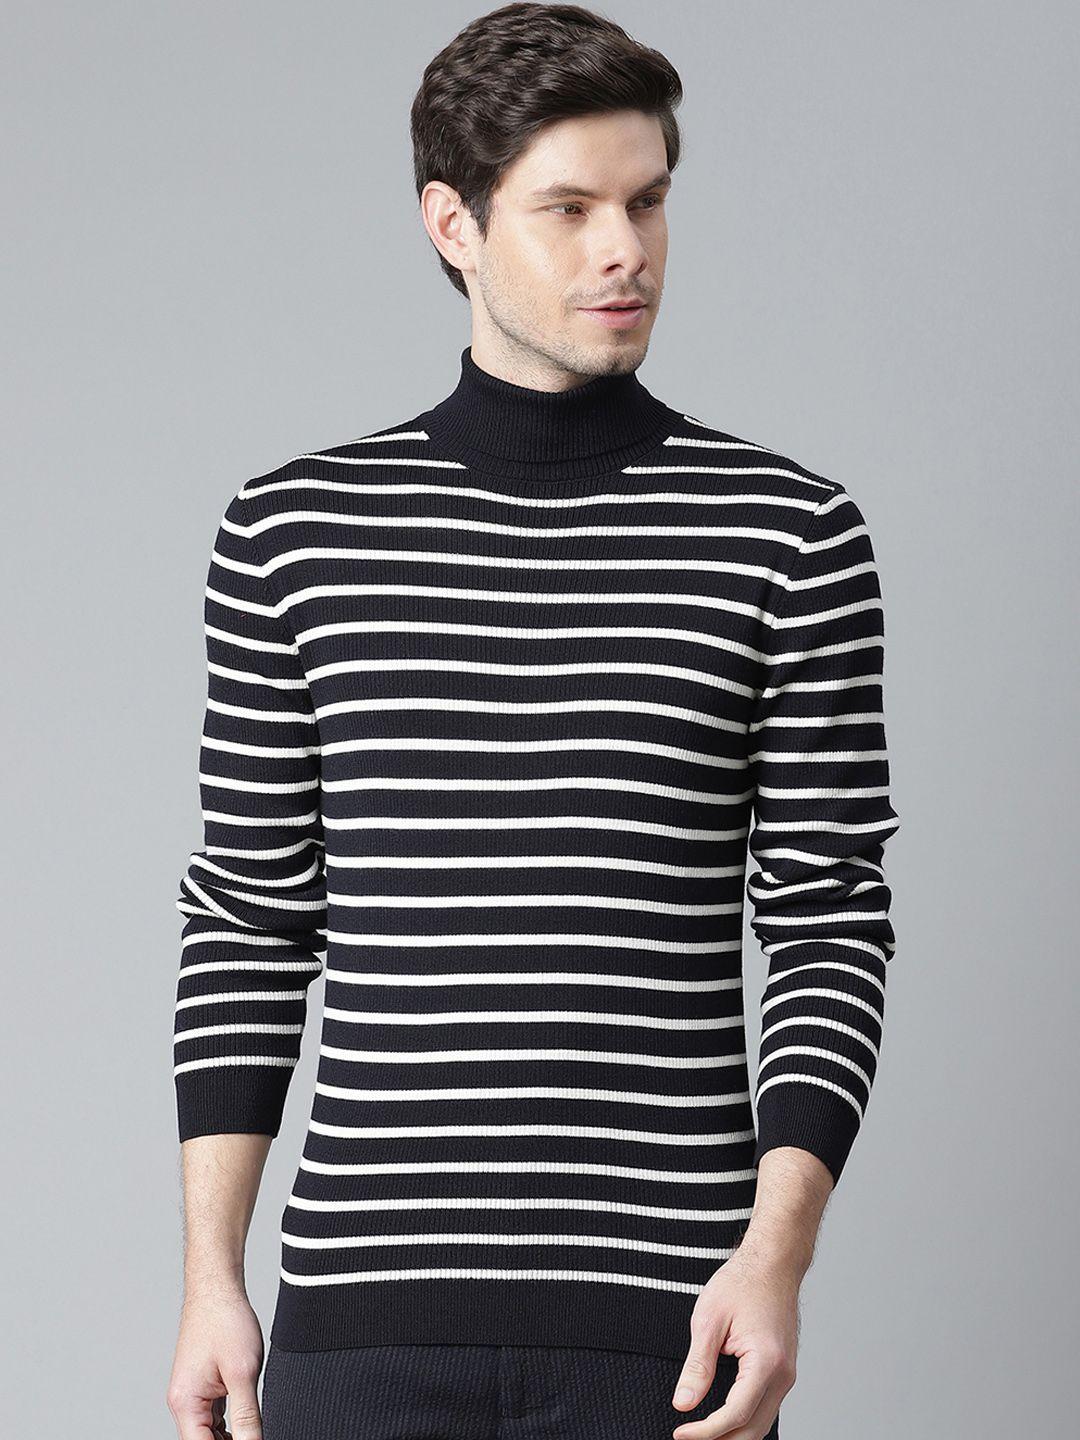 matinique-men-navy-blue-&-white-striped-pullover